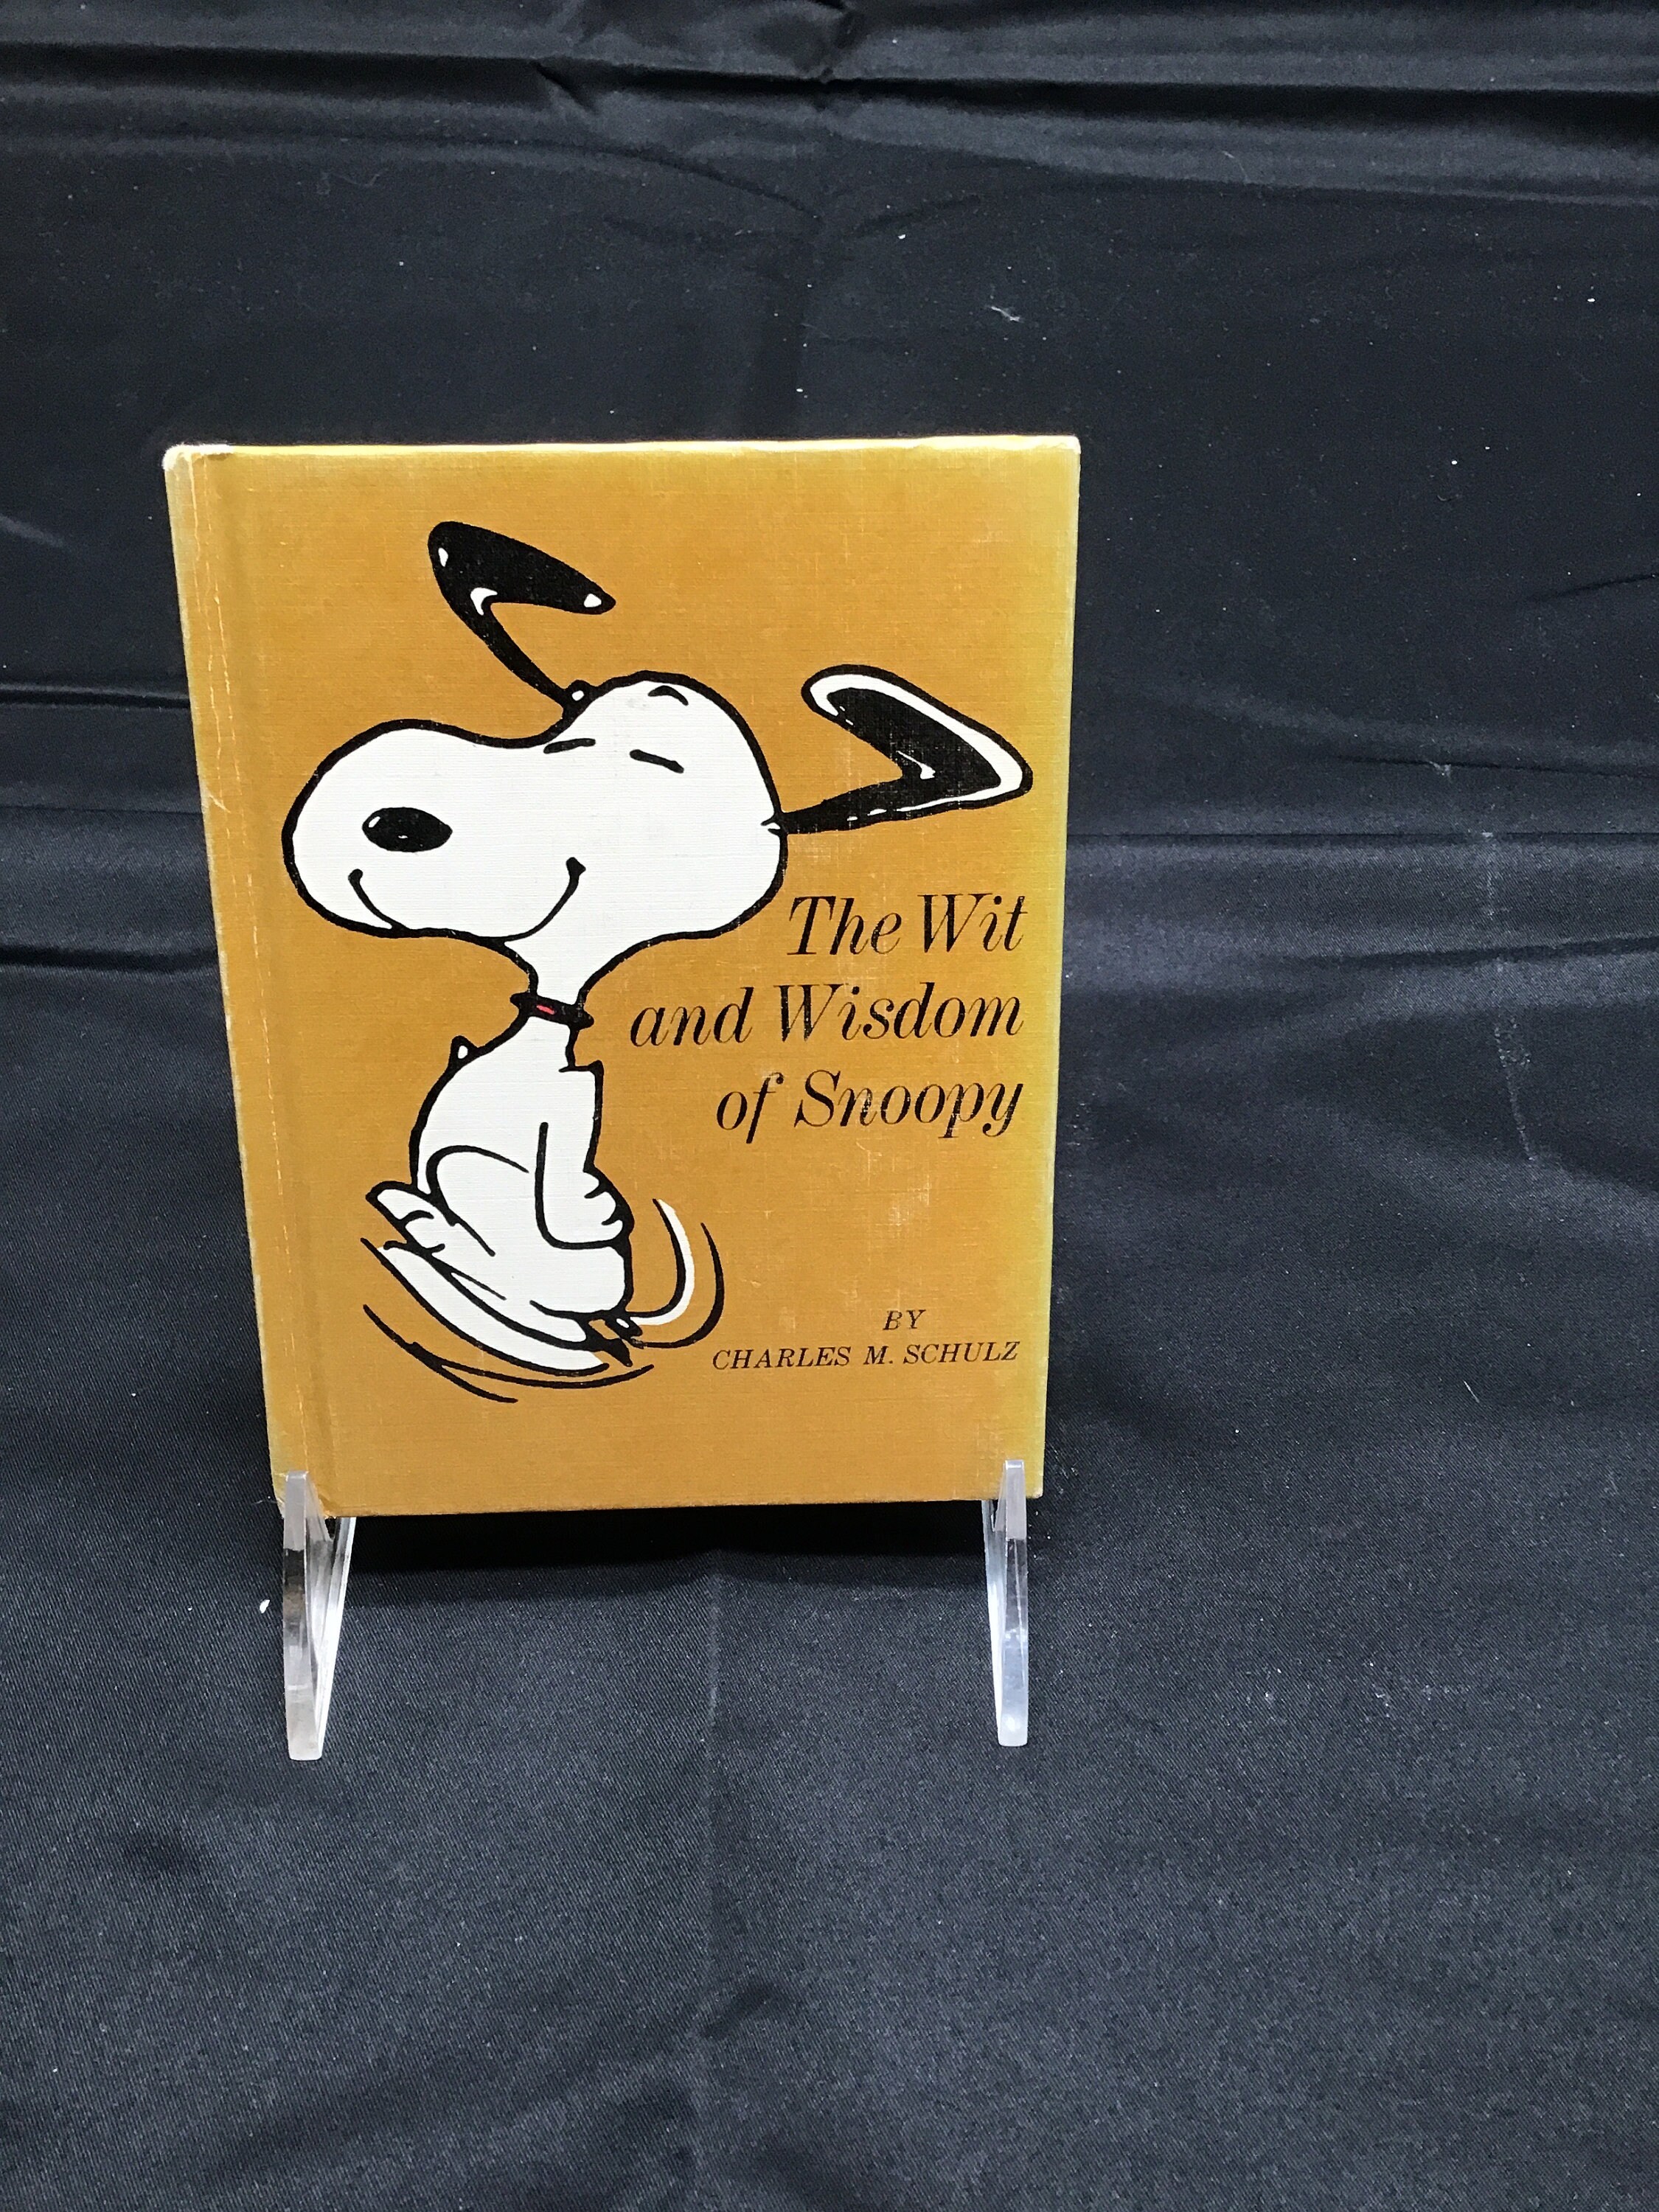 Vintage Peanuts Book. the Wit and Wisdom of Snoopy. Hardback. 